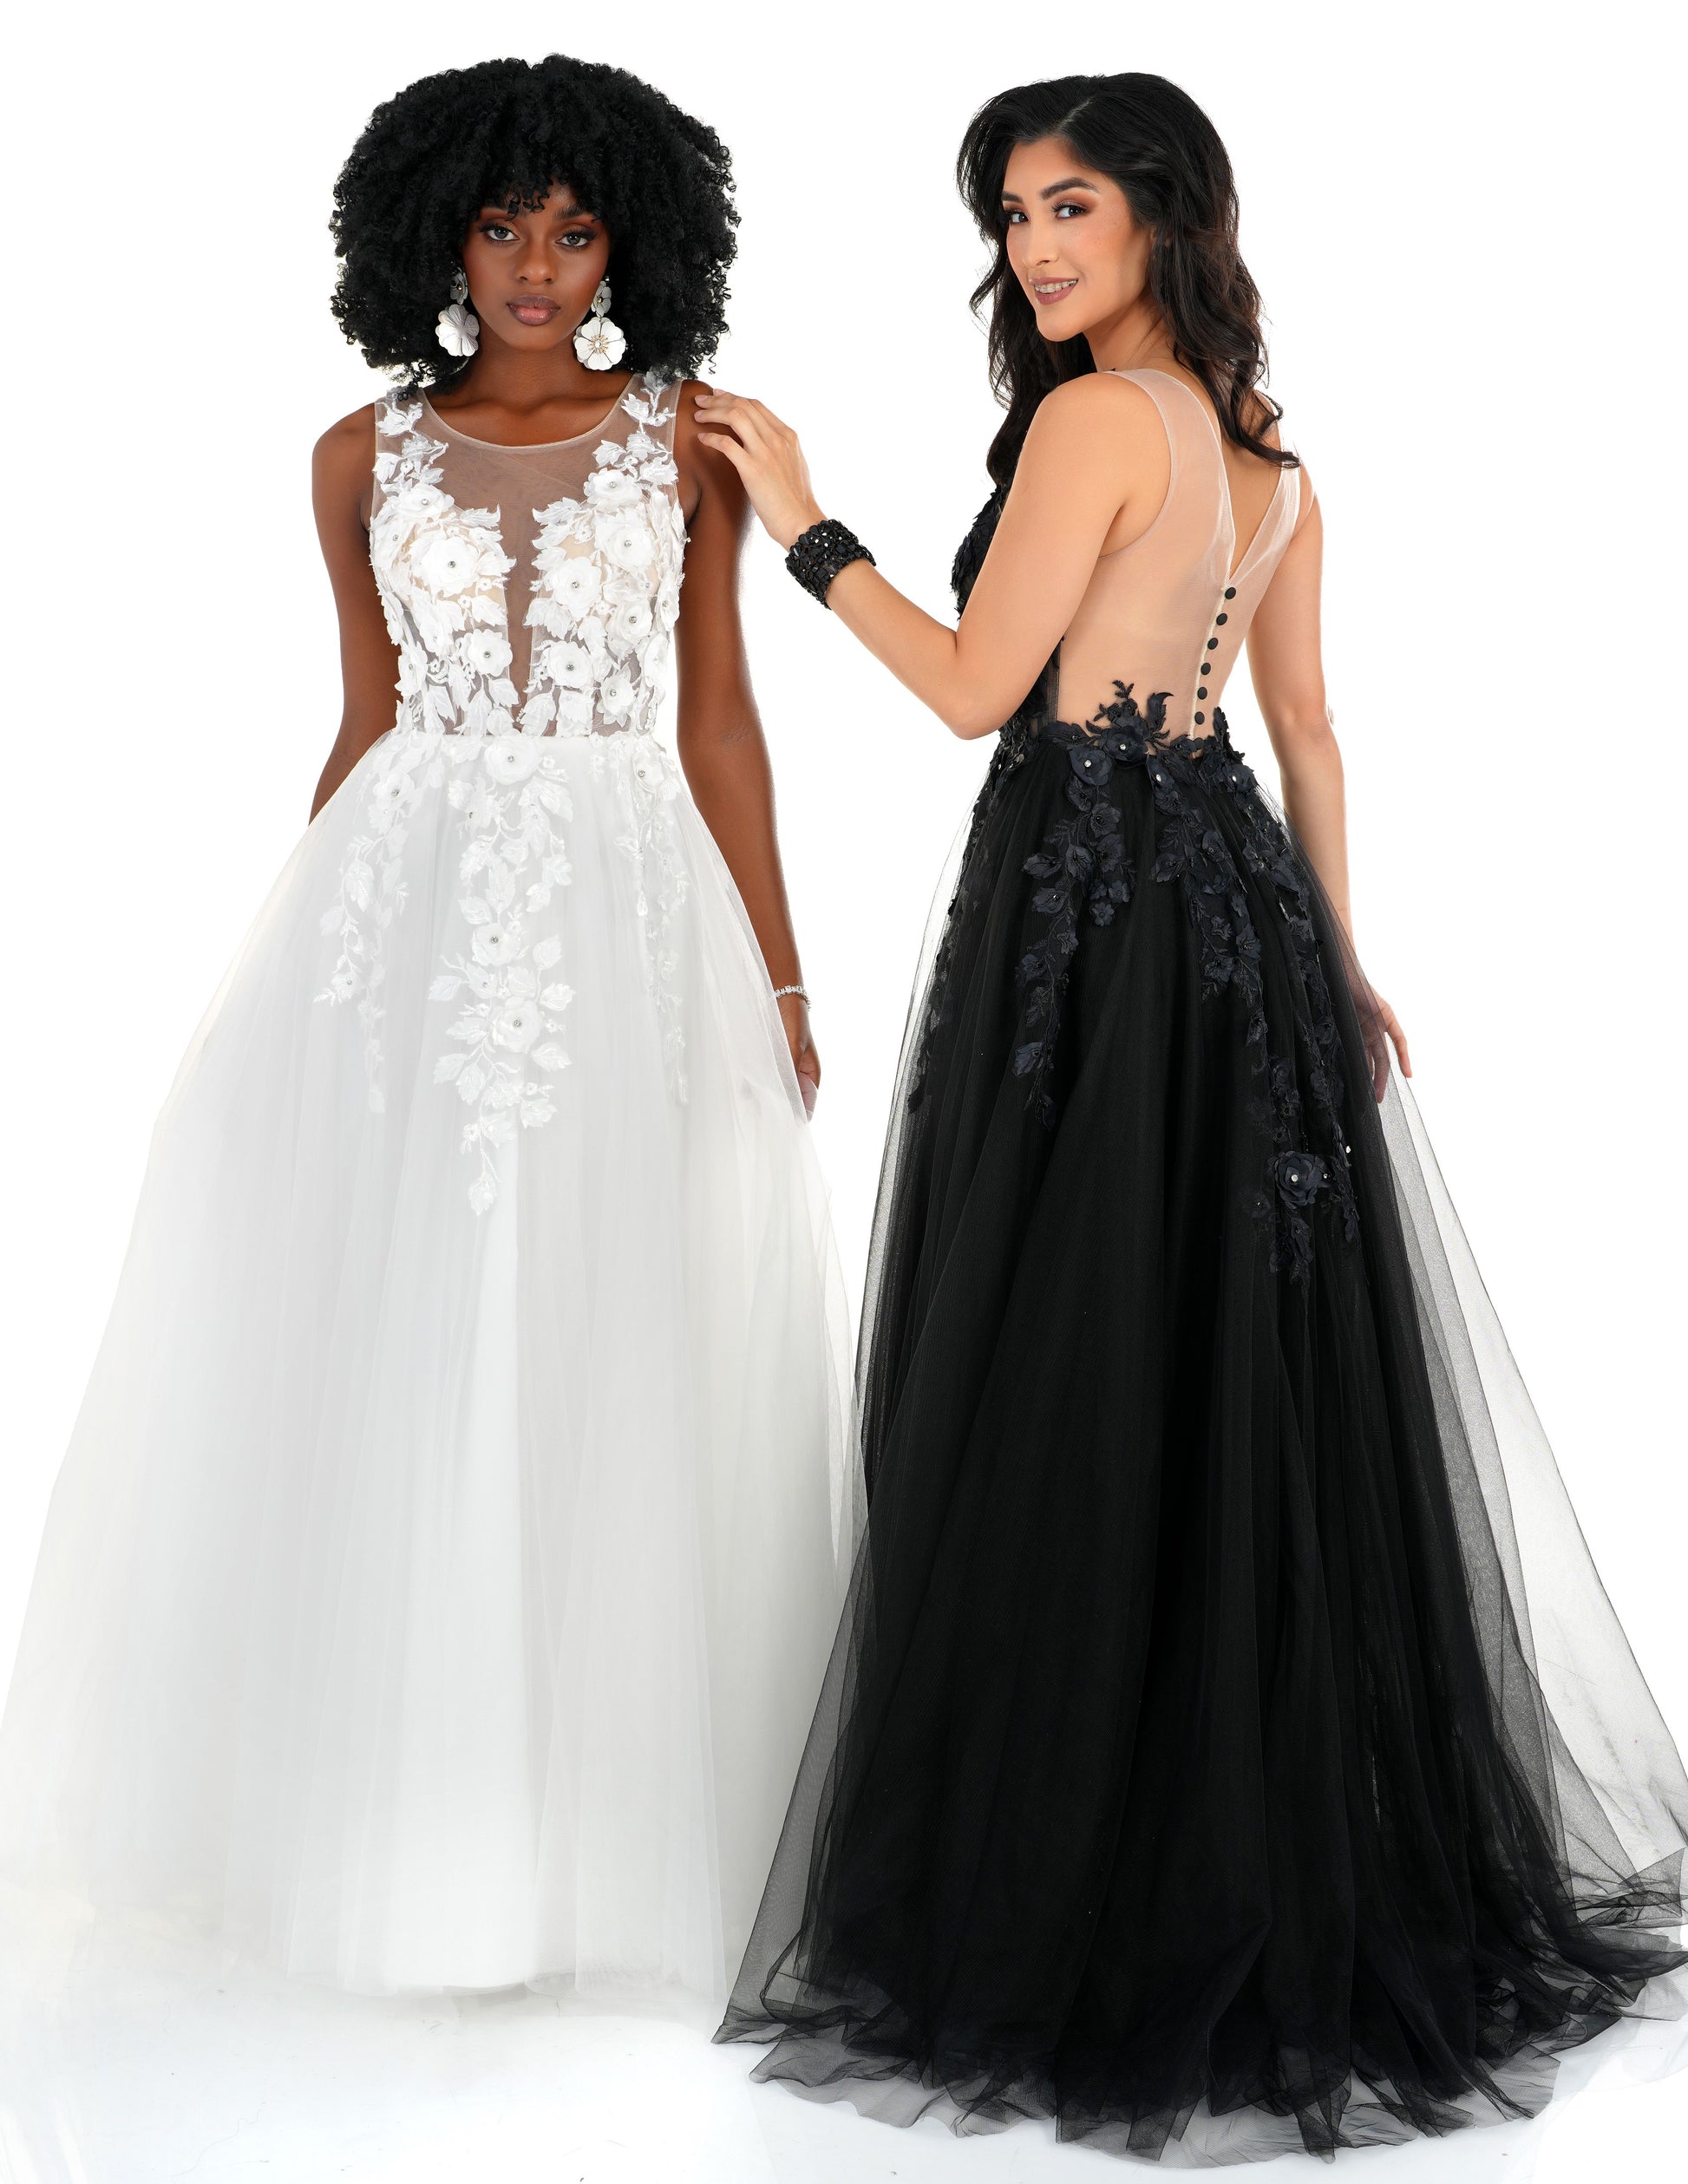 This exquisite wedding dress is crafted with sheer black and floral 3D lace detail. The Sheer high neck and  back button illusion closure creates a sophisticated silhouette, perfect for a special occasion. The Cecilia Couture 1522 ballgown is a timeless, stylish choice. A ine with a tulle skirt & Sheer Rhinestone Embellished dimensional Lace.  Sizes: 4-18  Colors: Black, White